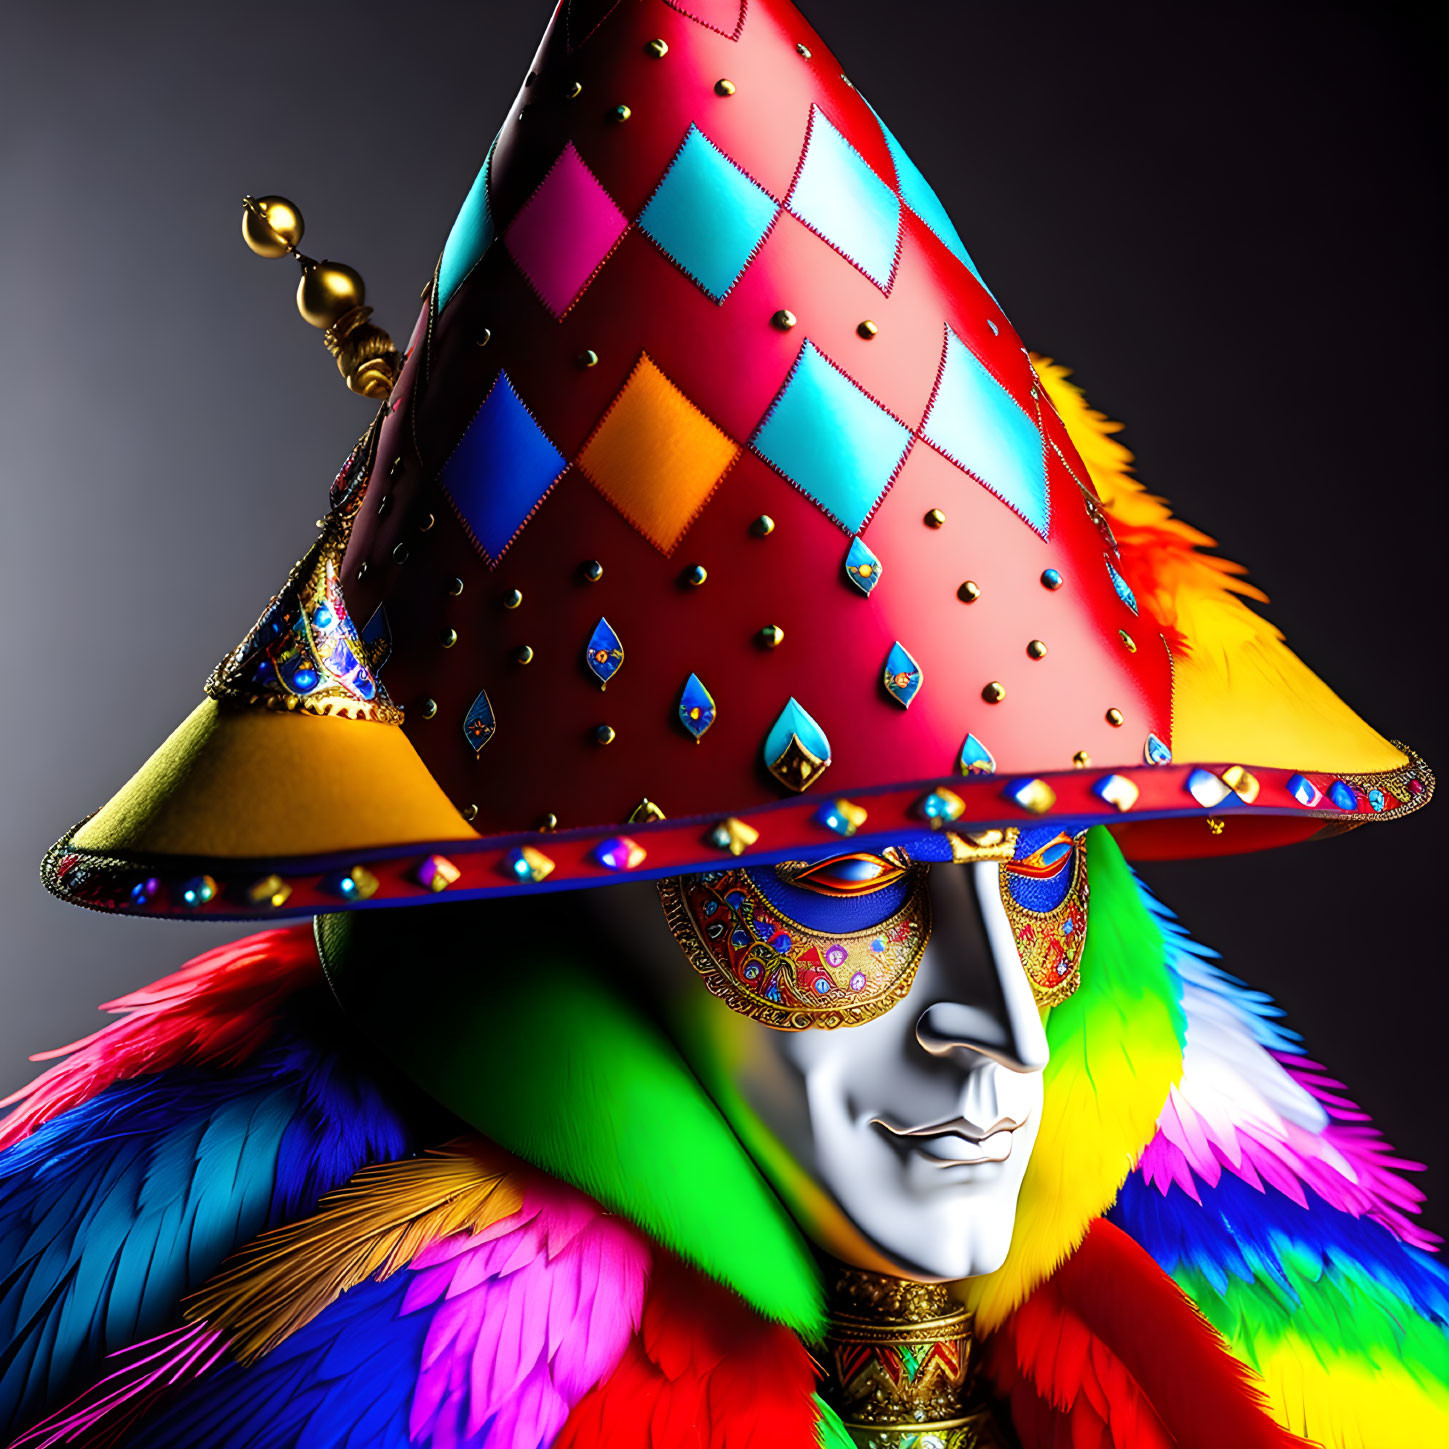 Harlequin mask with diamond-patterned hat and feather boa on grey background